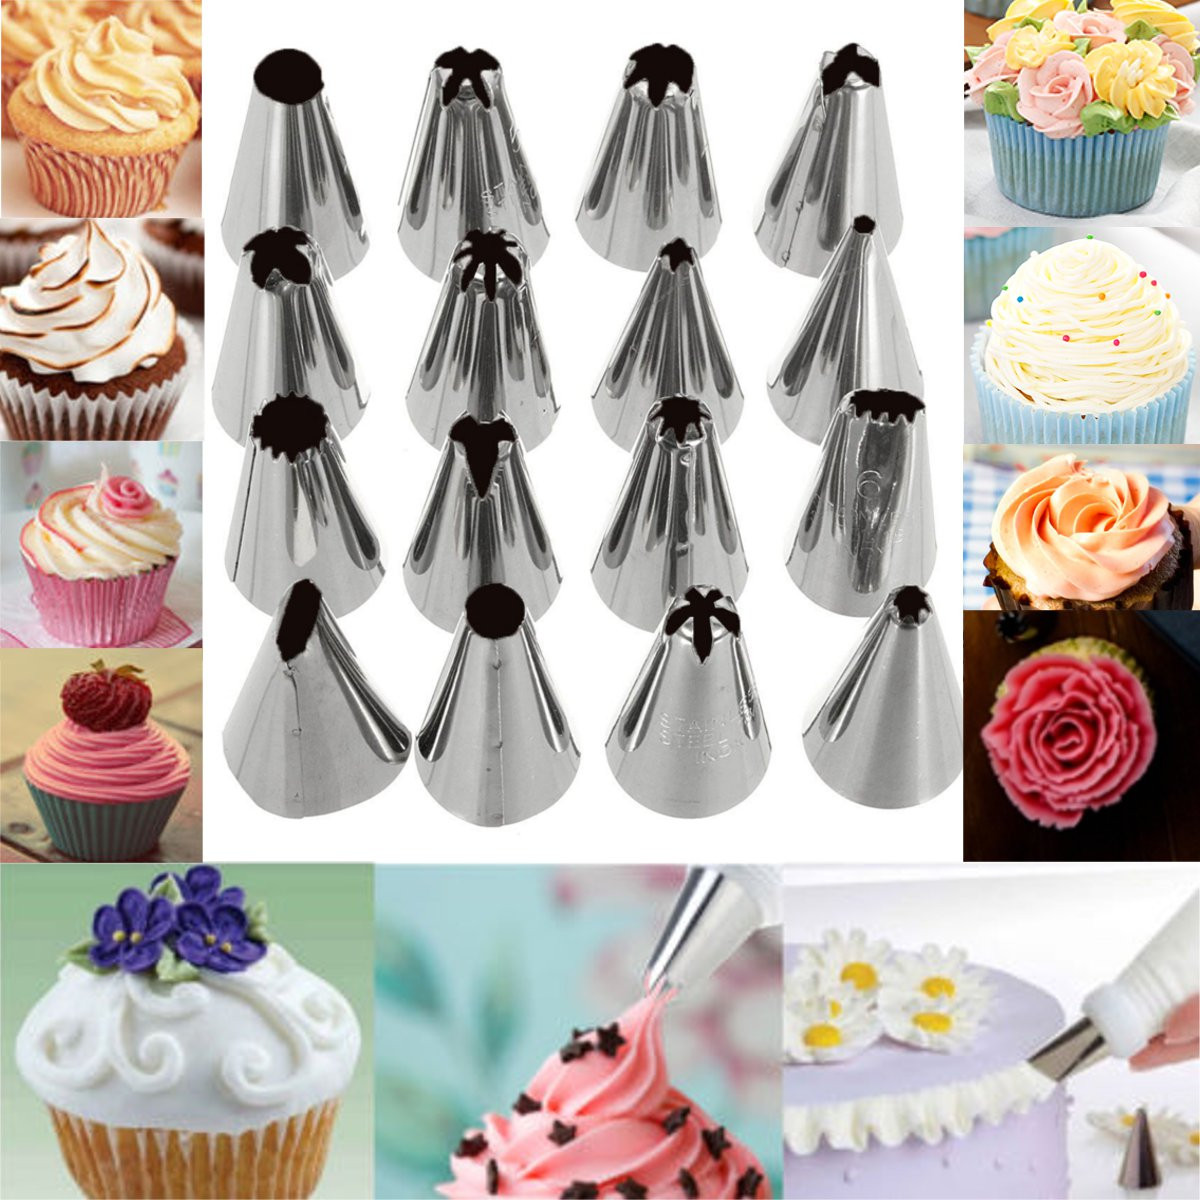 16-Pcs-Set-Russian-Piping-Tips-Multi-shape-Icing-Npzzles-Cake-Decoration-Top-Baking-Accessories-1139832